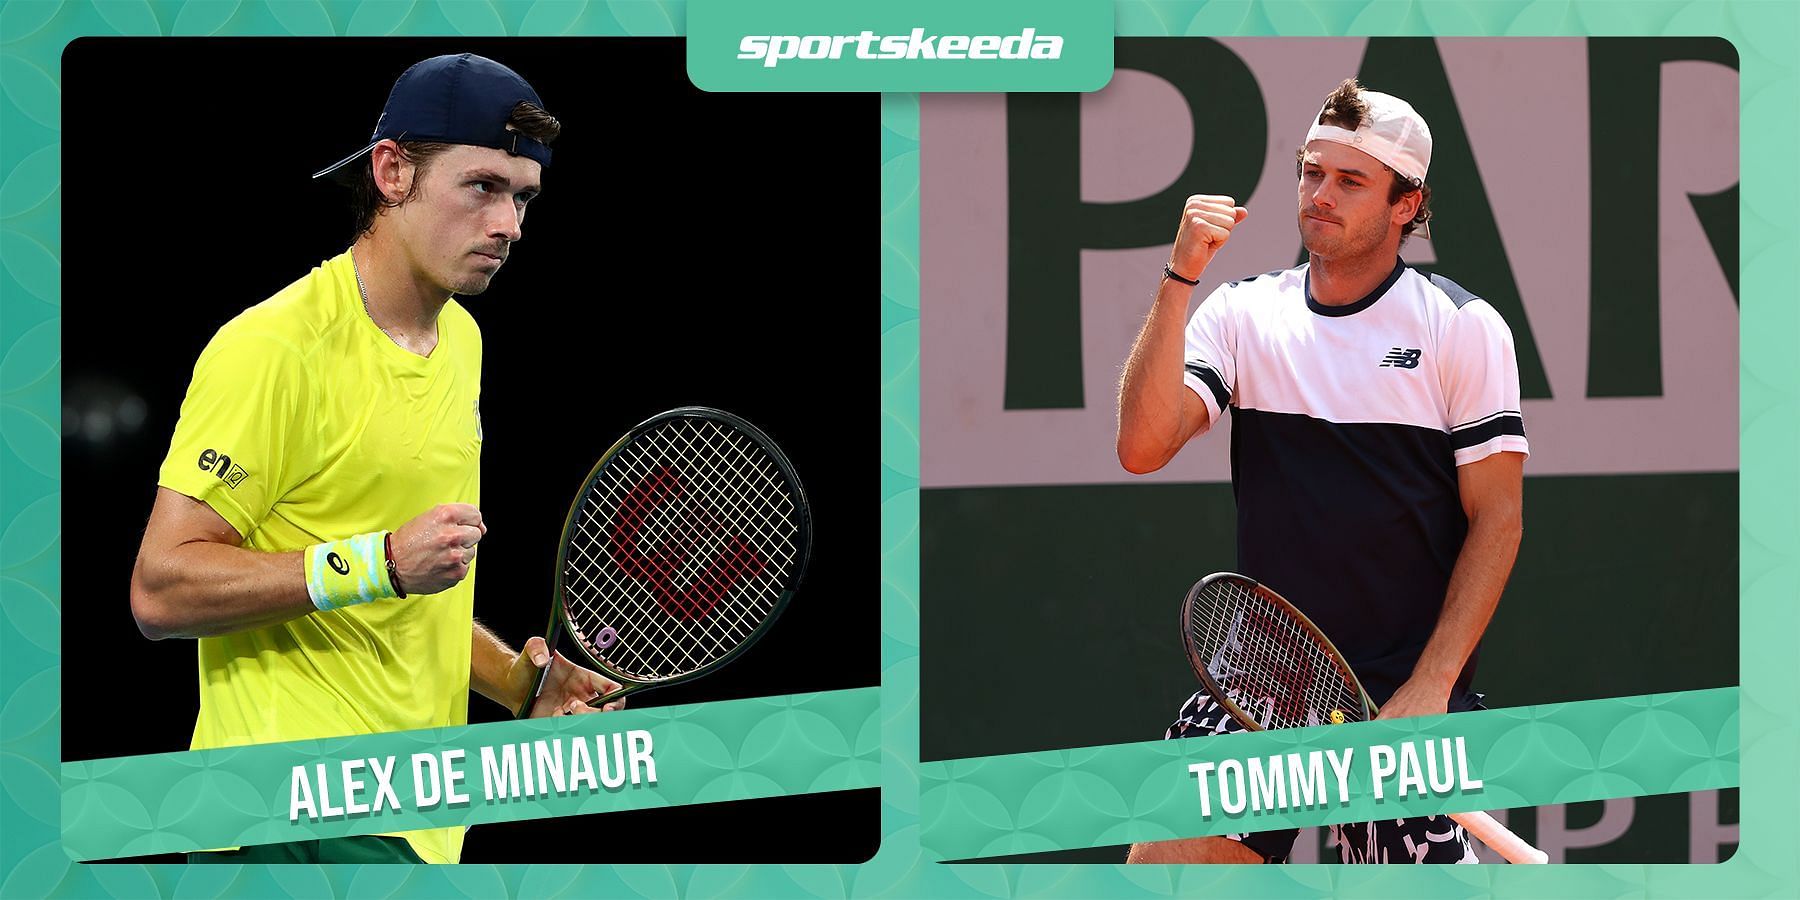 Alex de Minaur takes on Tommy Paul in the quarterfinals of the Rothesay International